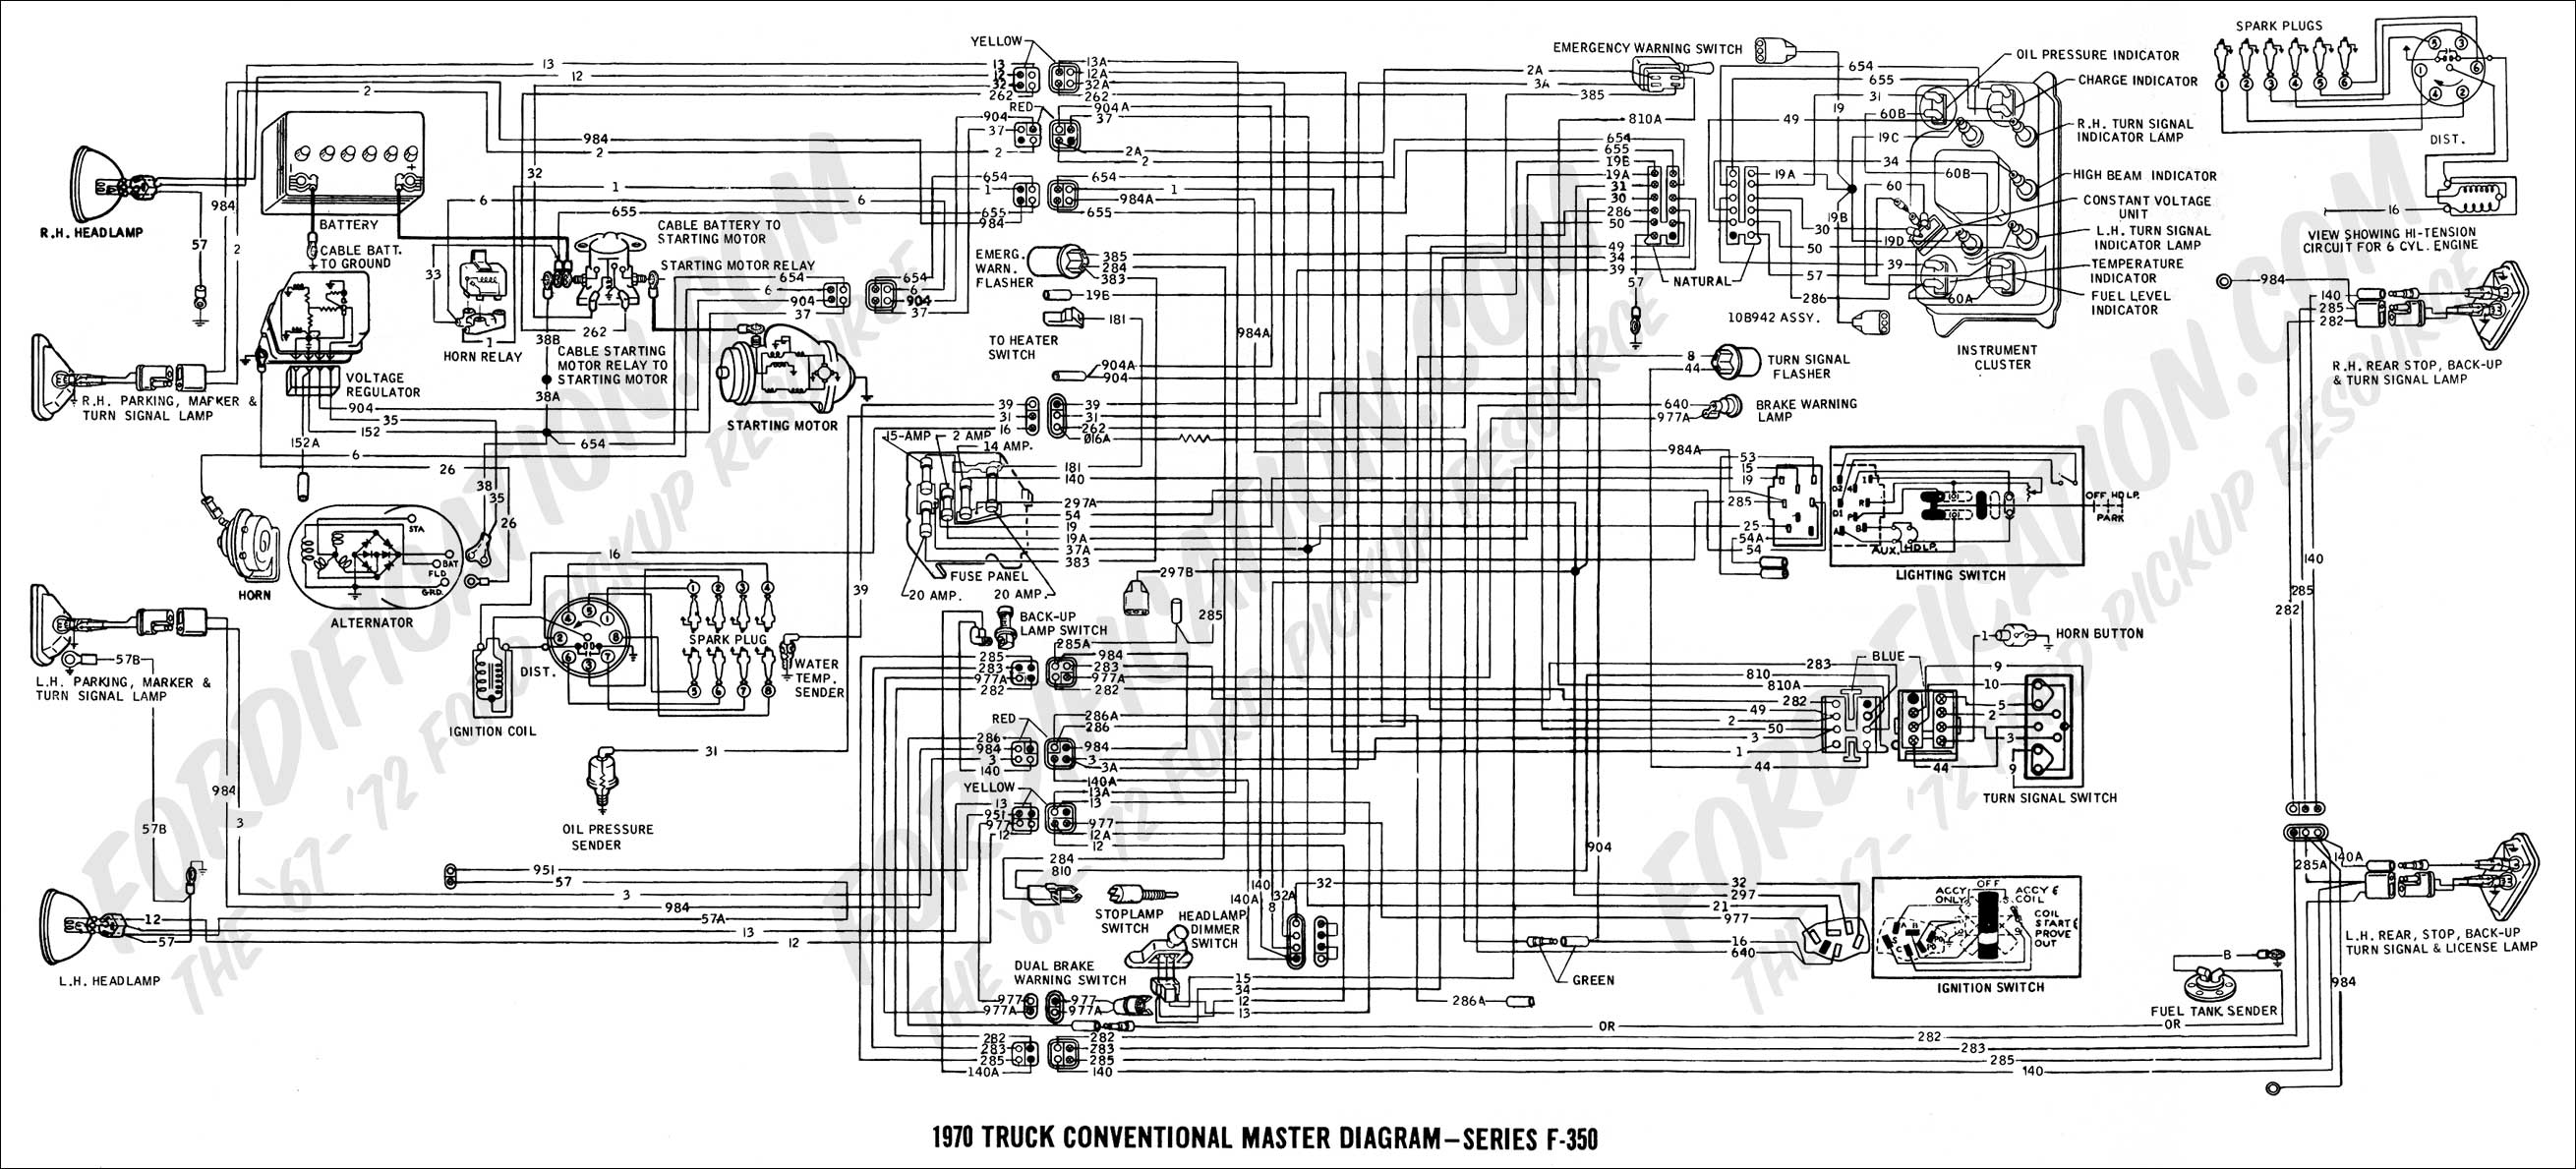 2007 Ford F250 Trailer Brake Controller Wiring Diagram from www.fordification.com